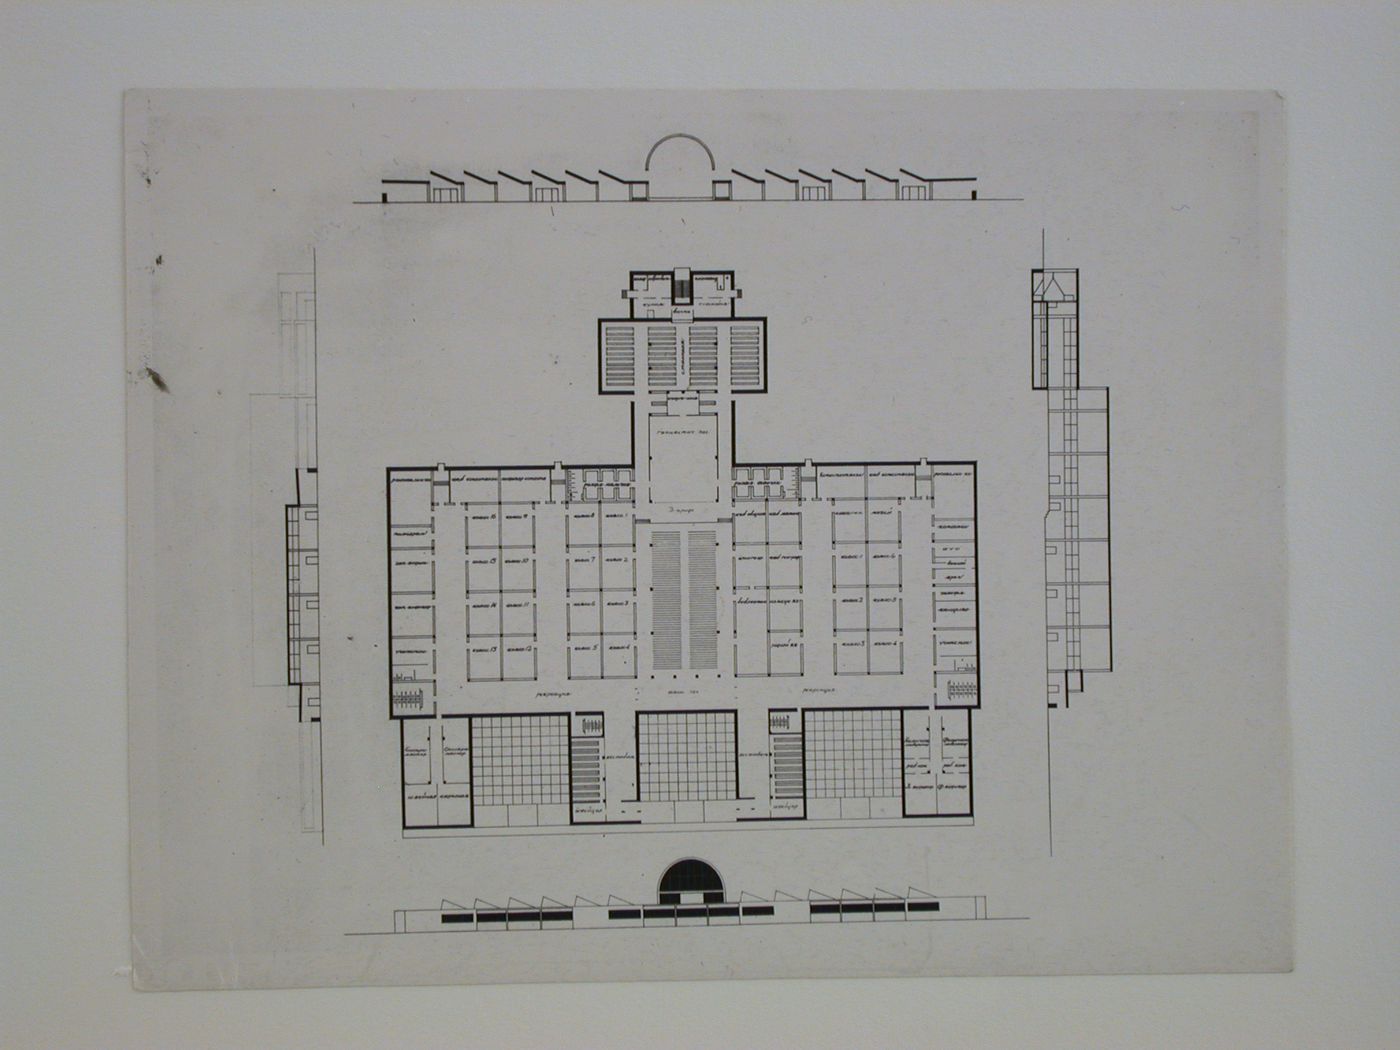 Photograph of plans and sections for an experimental design for a single-storey school, Soviet Union (now in Russia)